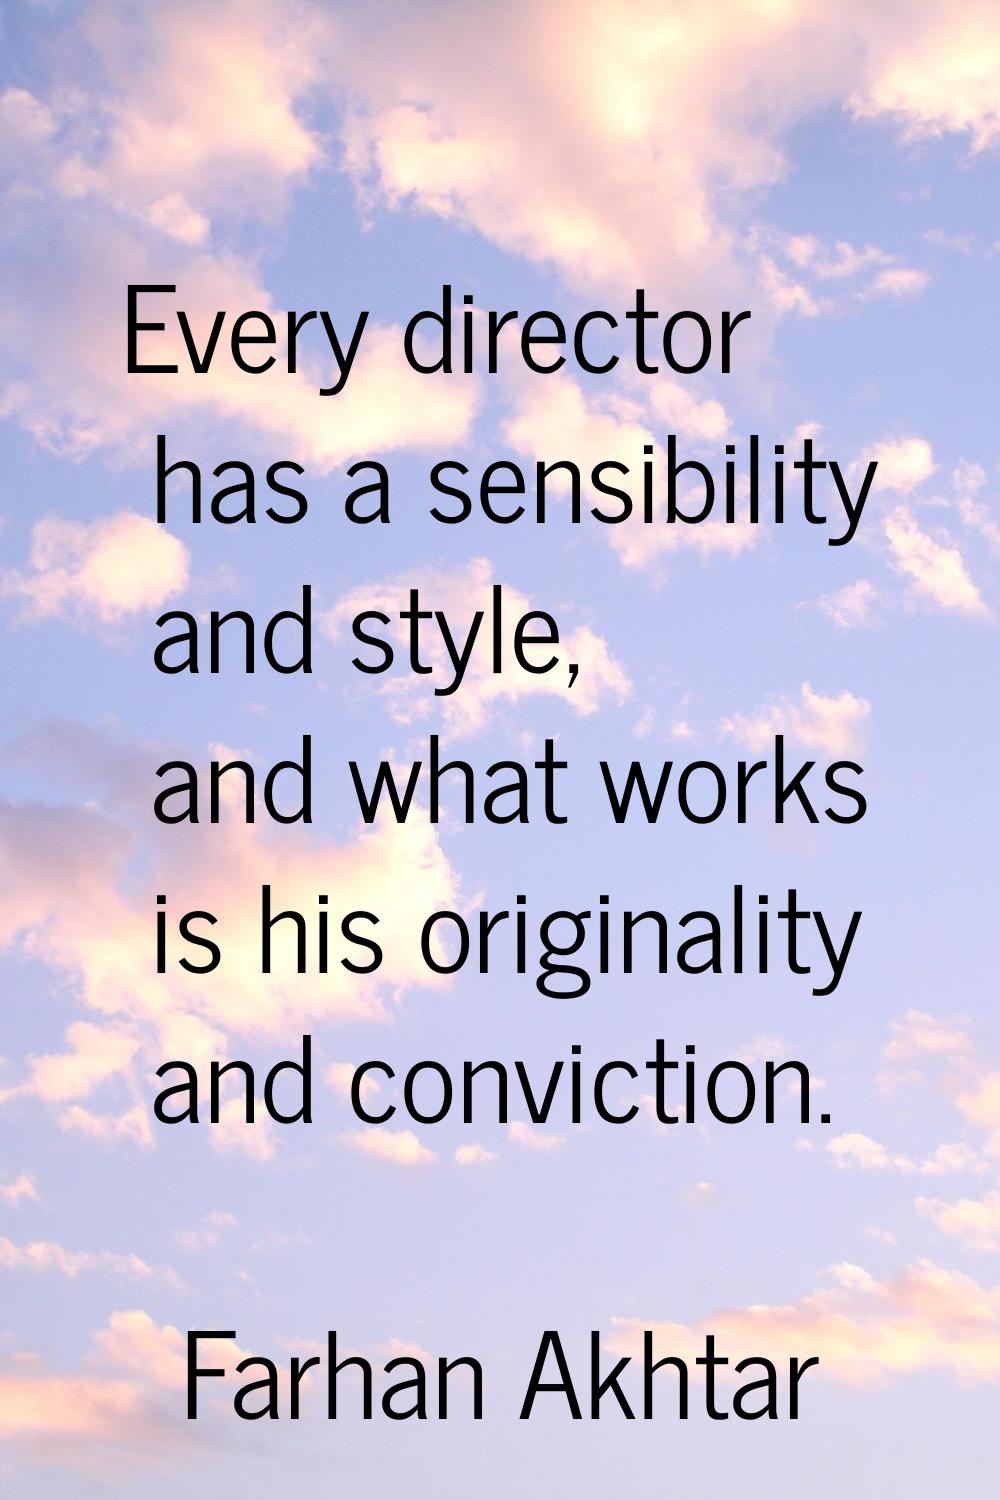 Every director has a sensibility and style, and what works is his originality and conviction.